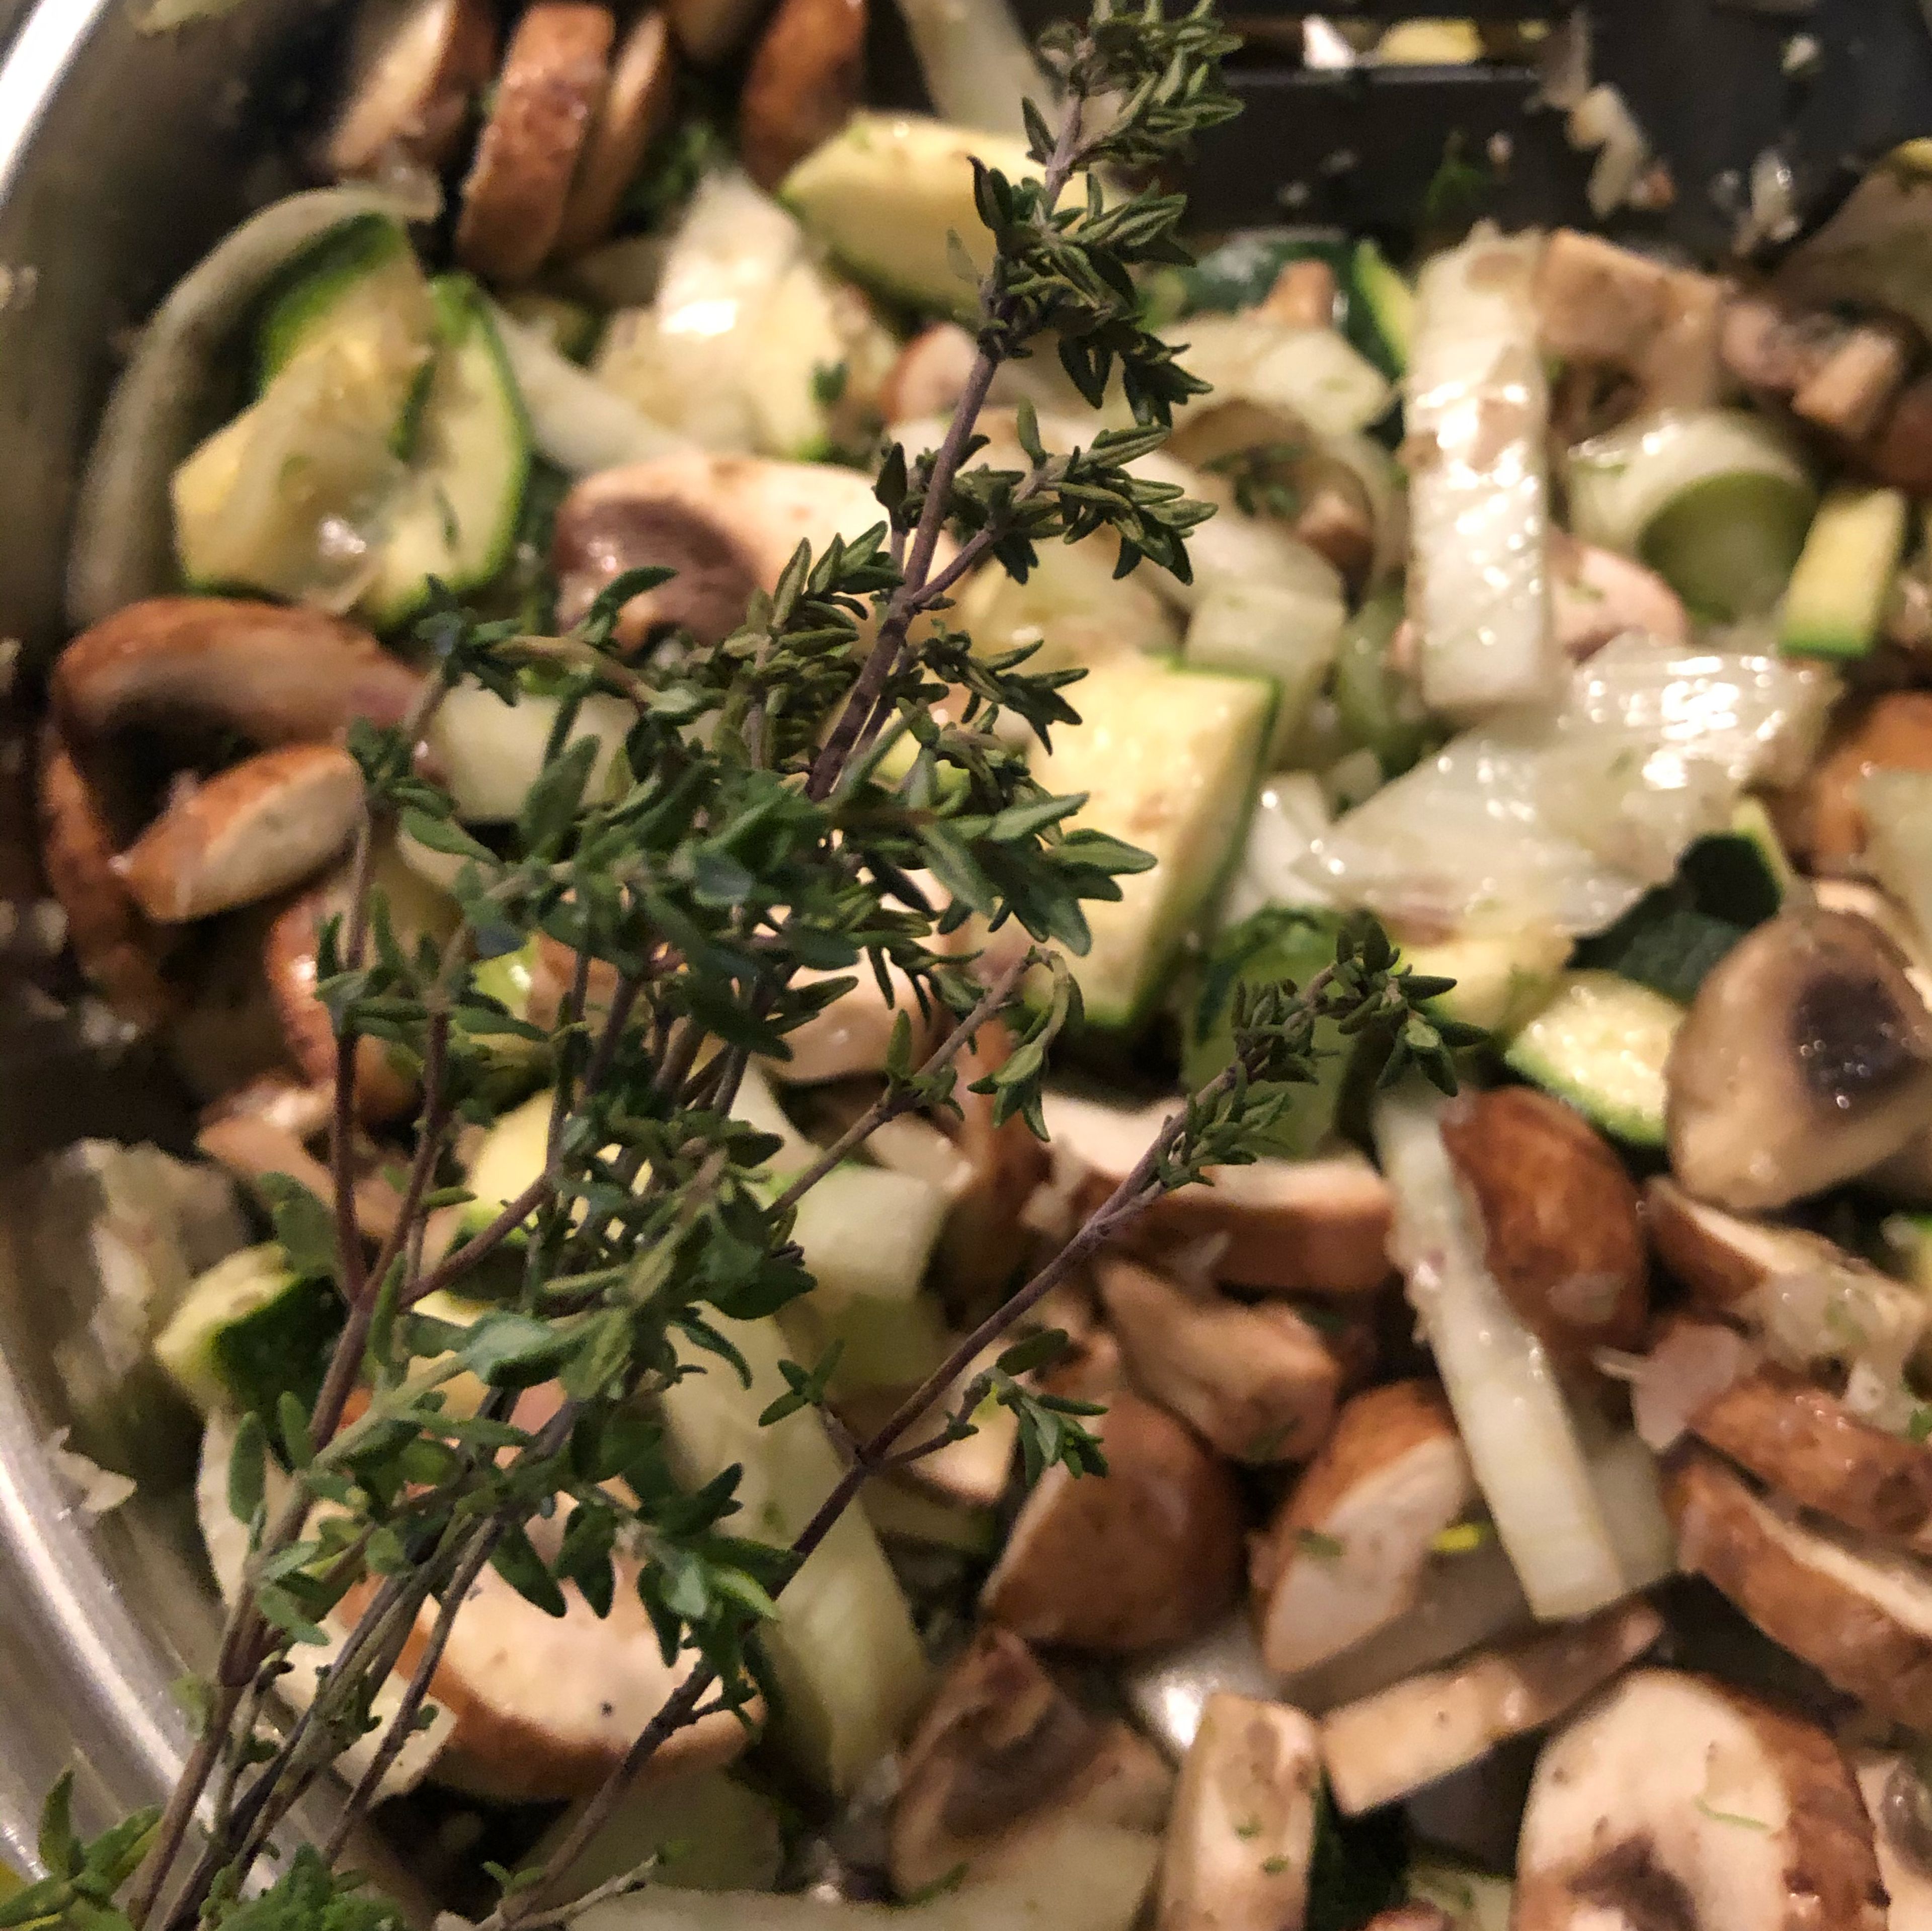 Heat oil in a frying pan. Sauté shallots and garlic and add the vegetables. After about 5 – 10 min., add the canned chunky tomatoes. Season with salt and pepper. Pluck fresh thyme and add it to the pan as well. Then let it all simmer down for approx. another 5 min.